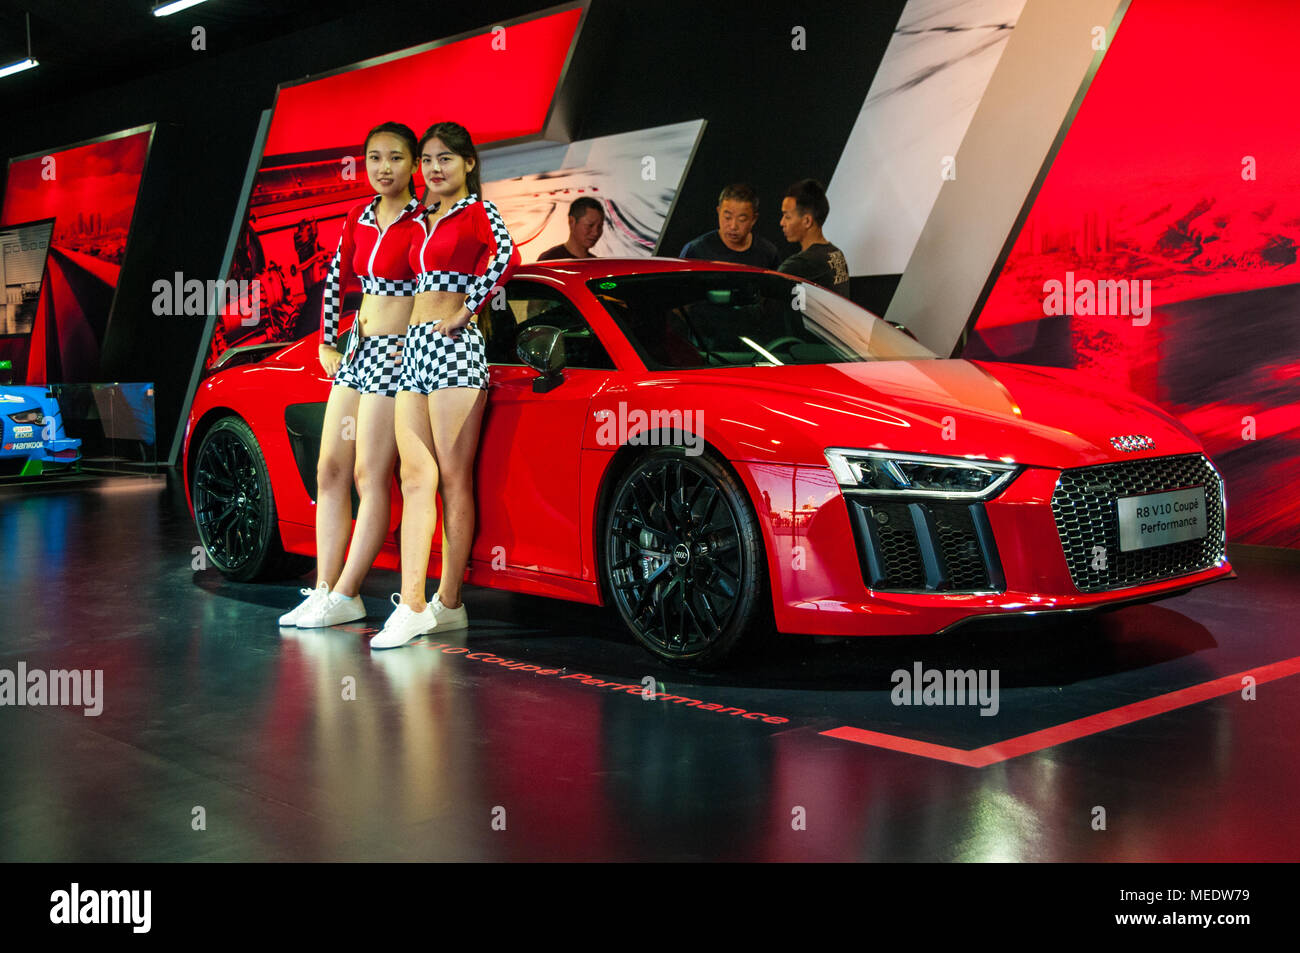 Chinese models in front of a red Audi R8 V10 Coupe Performance car at an Audi  Sport event at the Shanghai International Circuit Stock Photo - Alamy